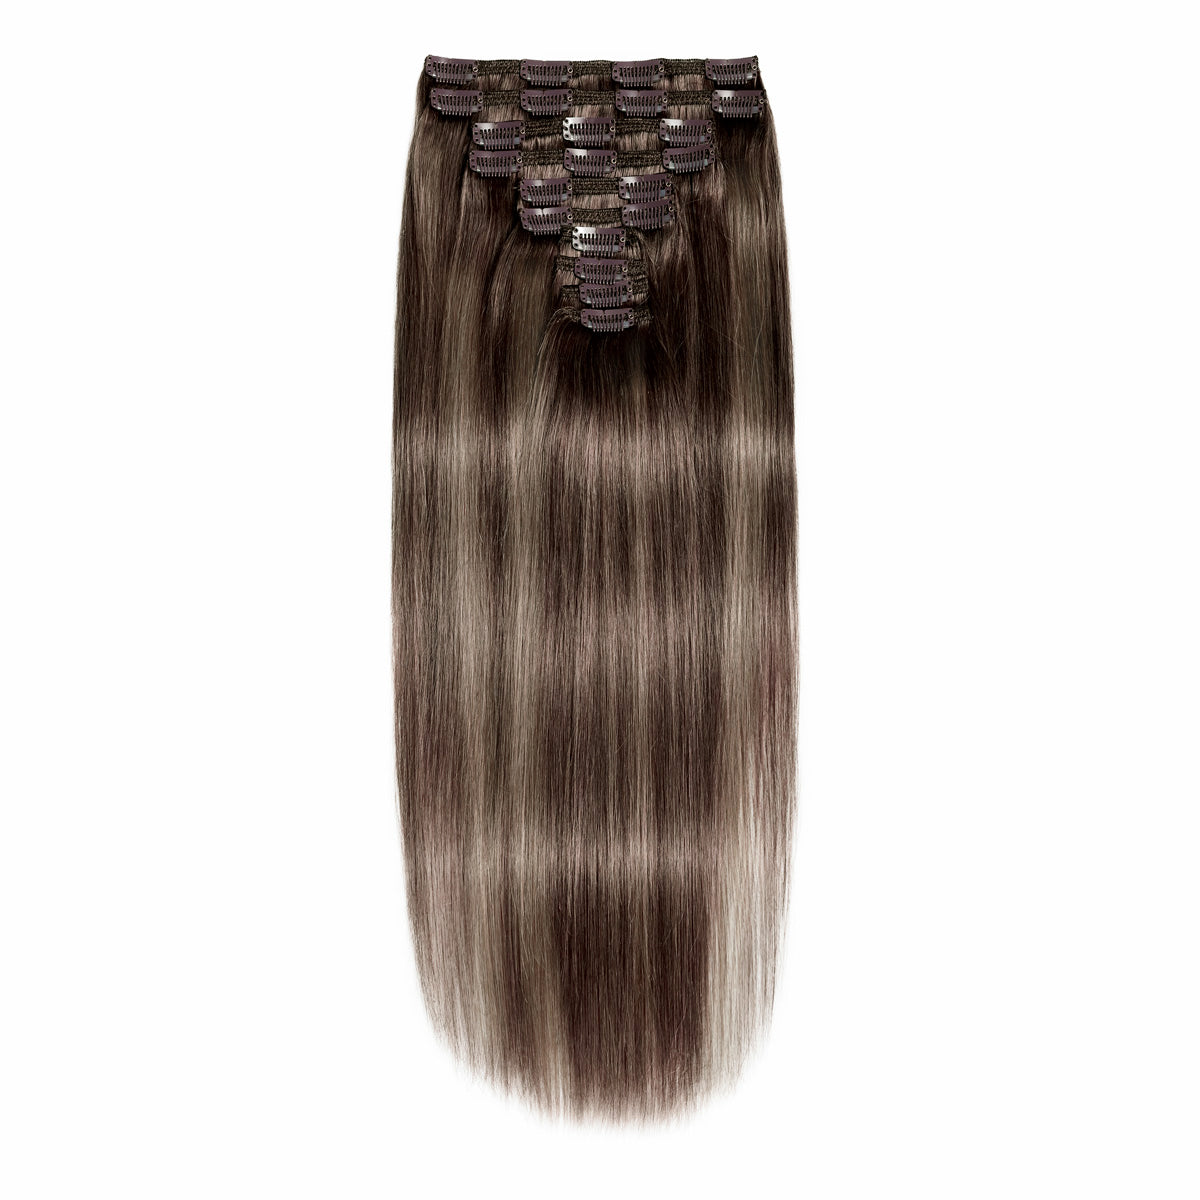 Proper care of 26 inch remy hair extensions is crucial for maintaining their beauty and longevity. Use specialized products and follow care instructions to keep your extensions looking their best.